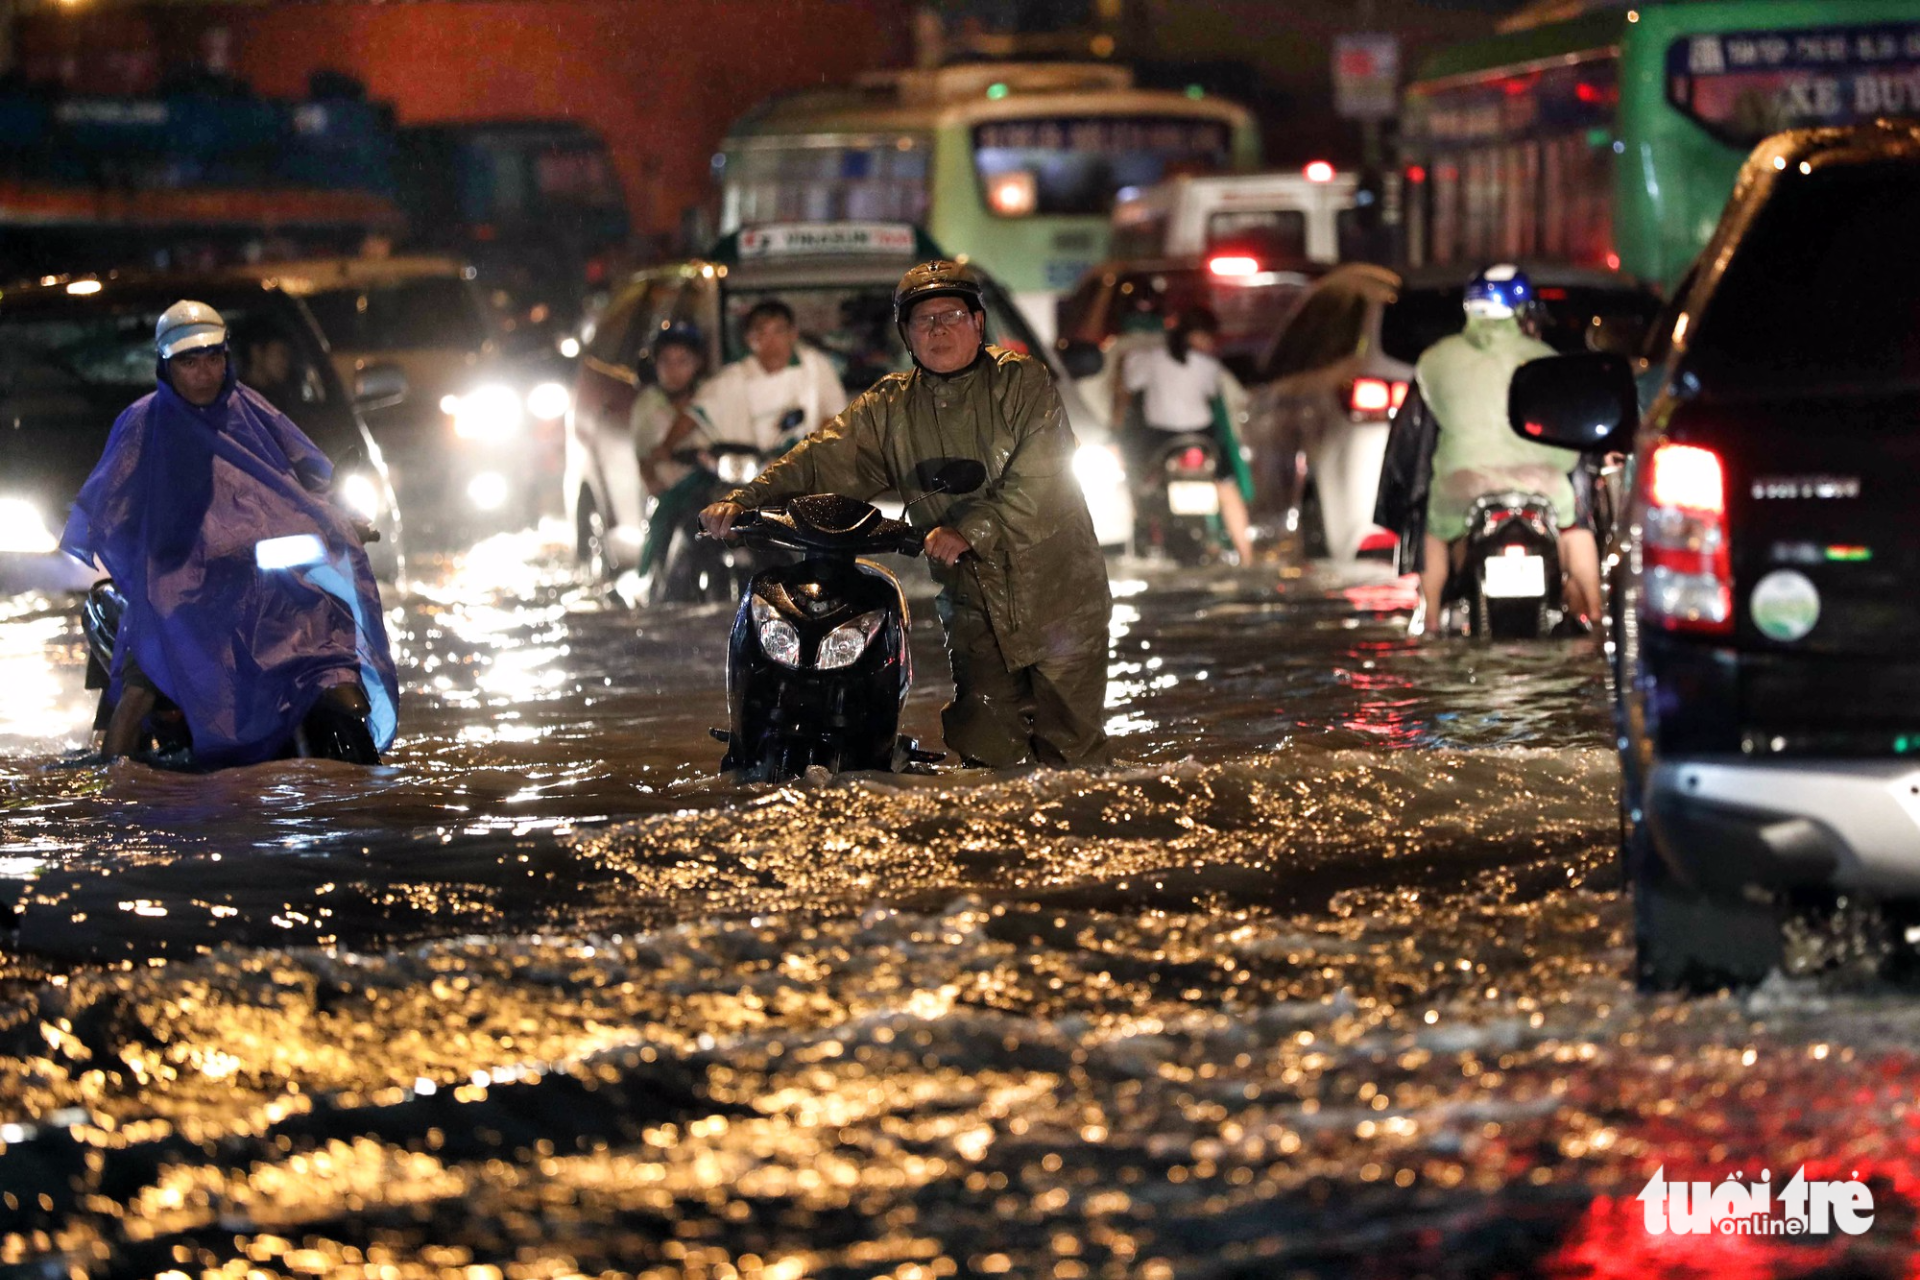 Commuters push their motorbikes manually on a flooded street. Photo: Tuoi Tre